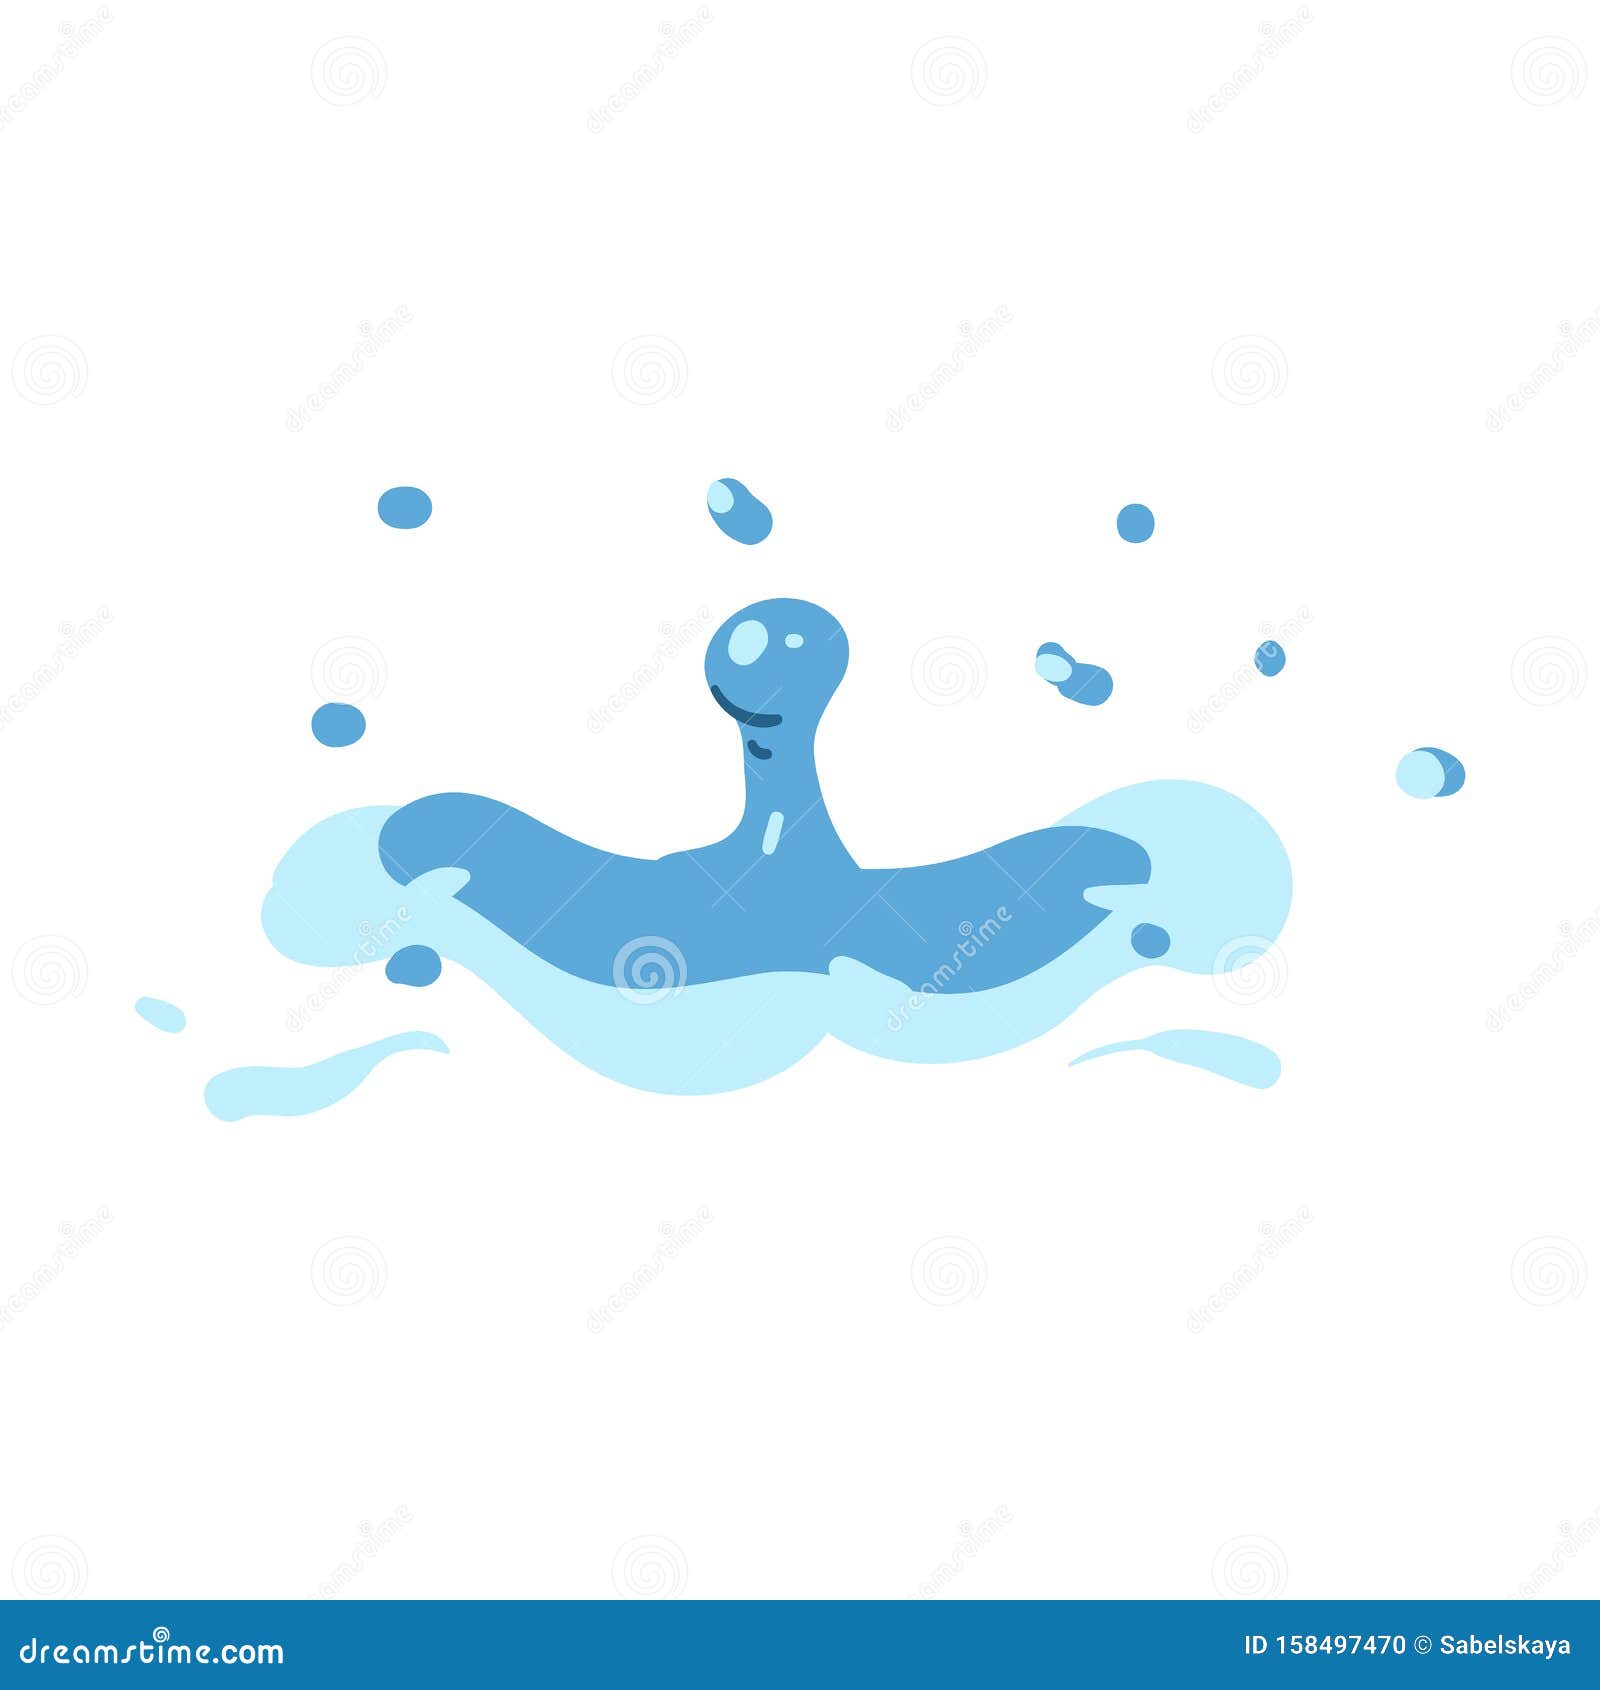 Water Drop Splash Motion Drawing Isolated on White Background Stock